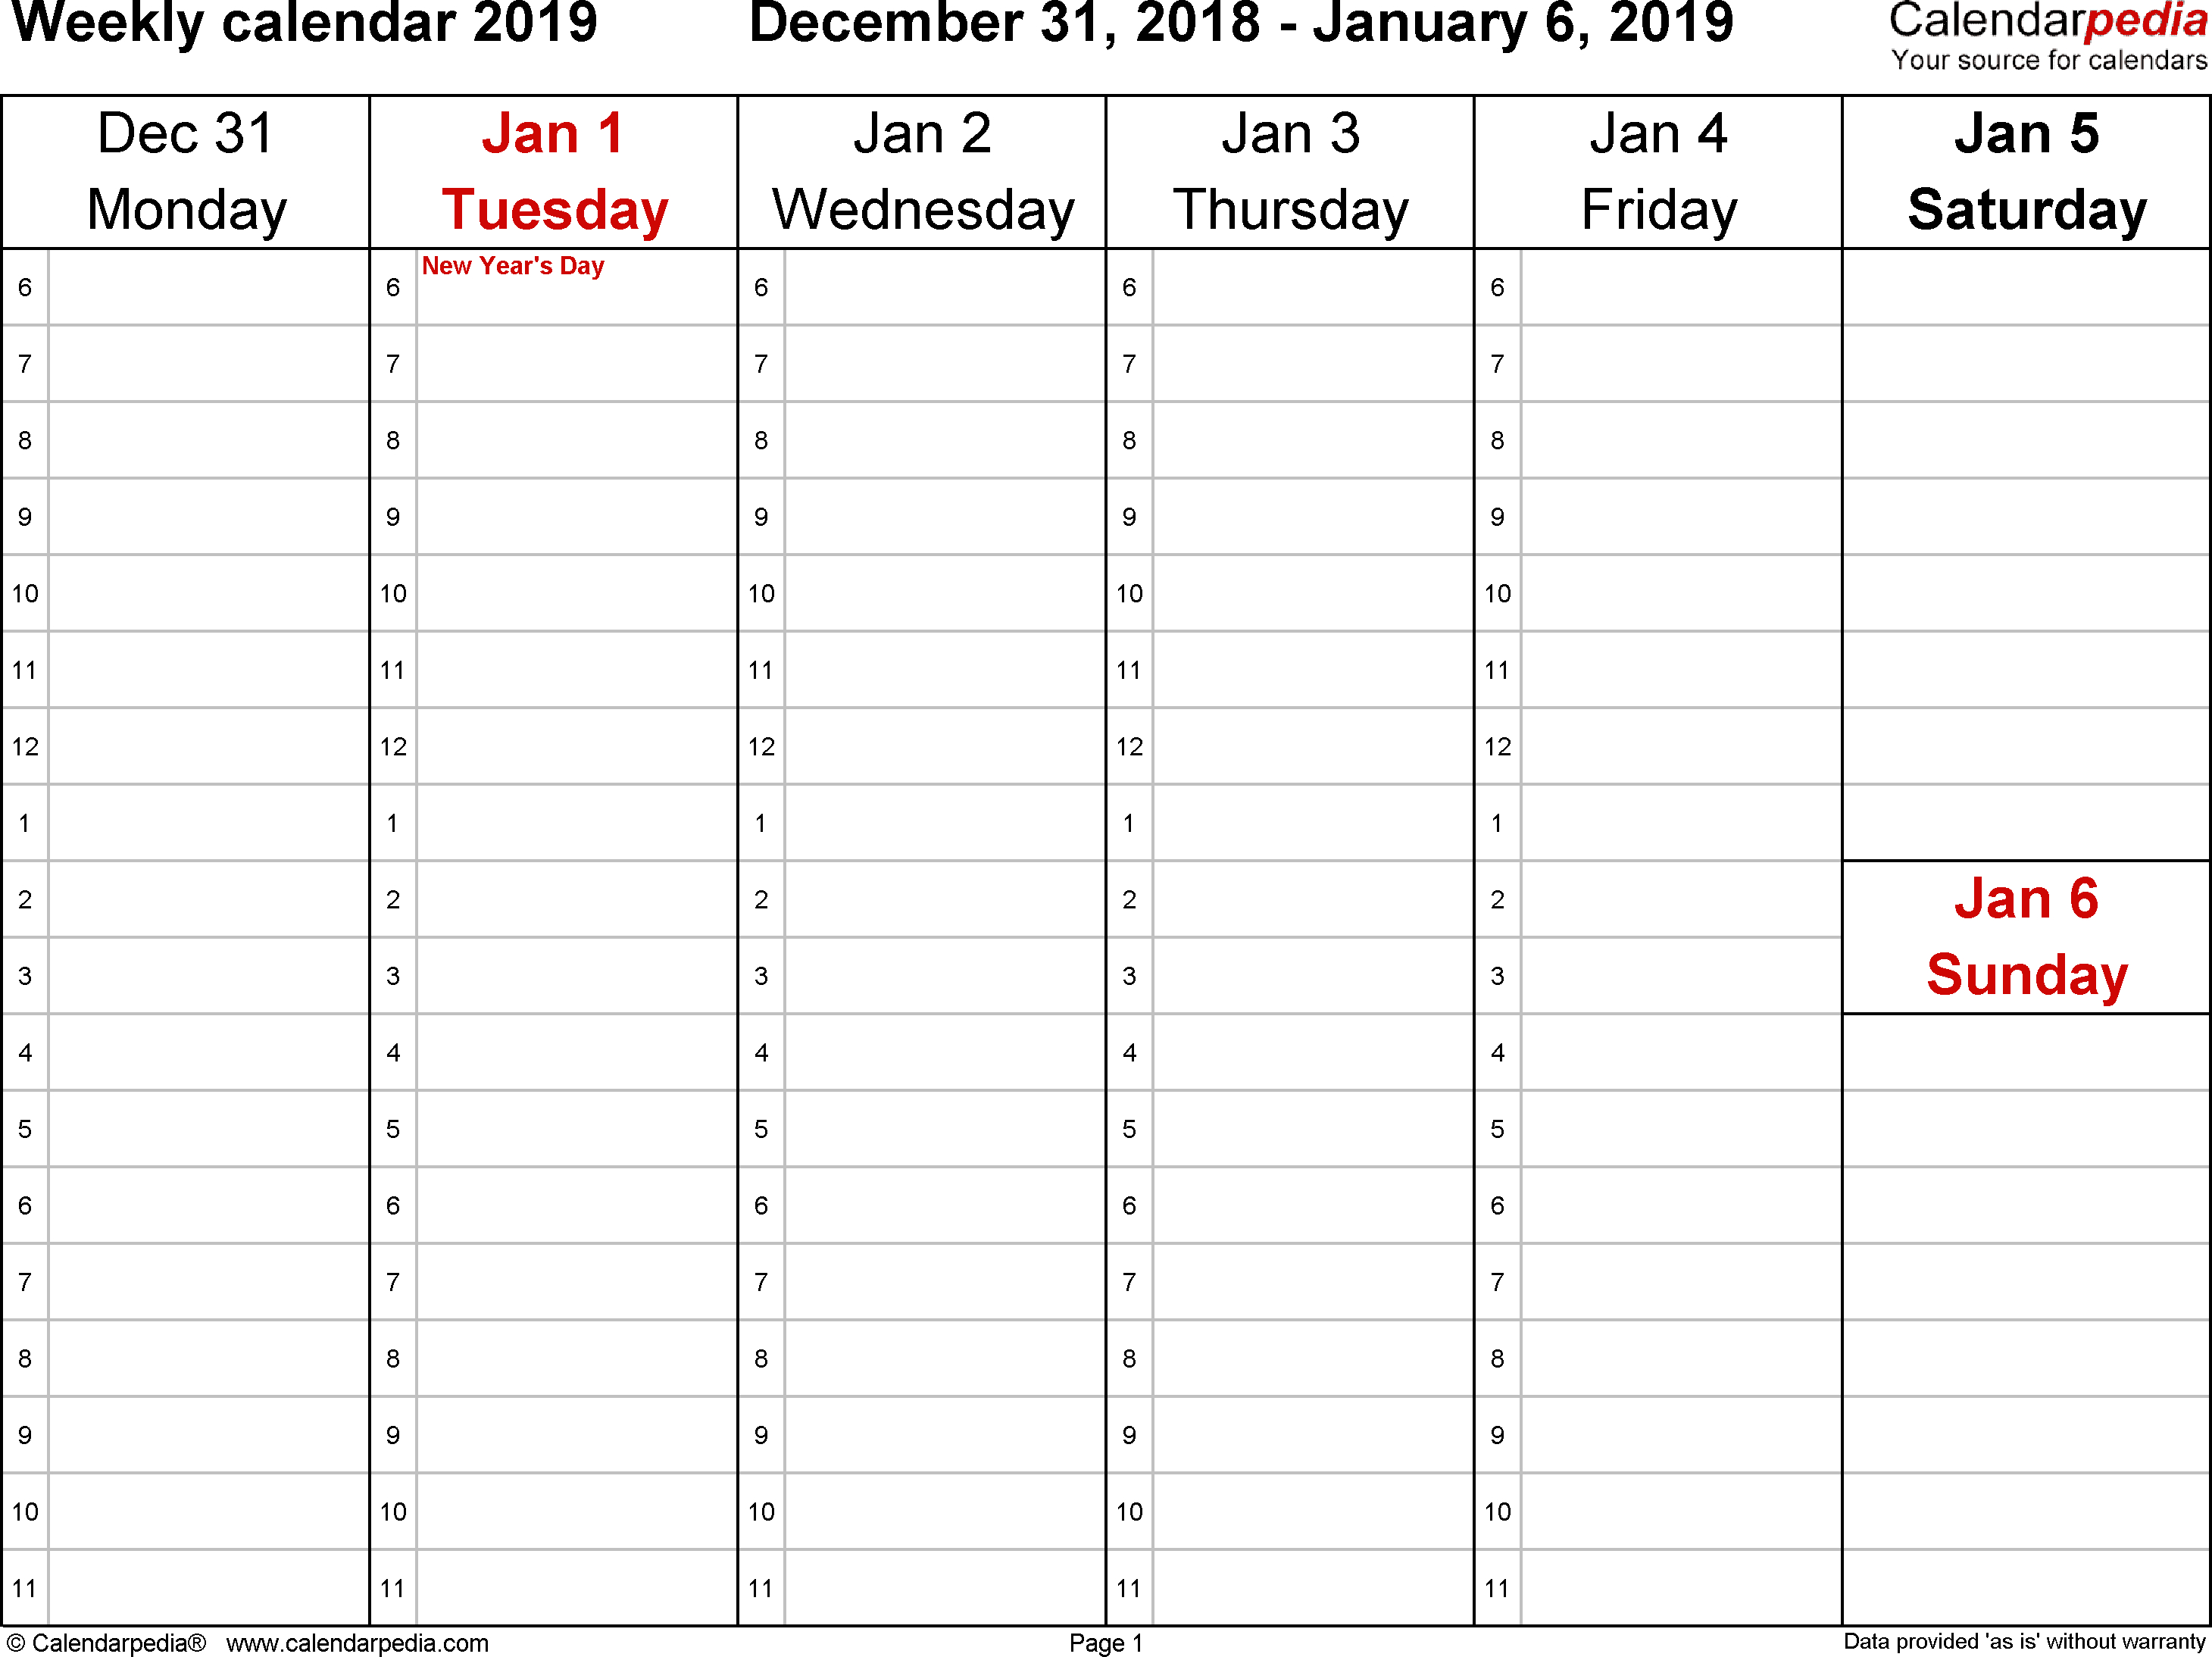 Weekly Calendars 2019 For Word - 12 Free Printable Templates